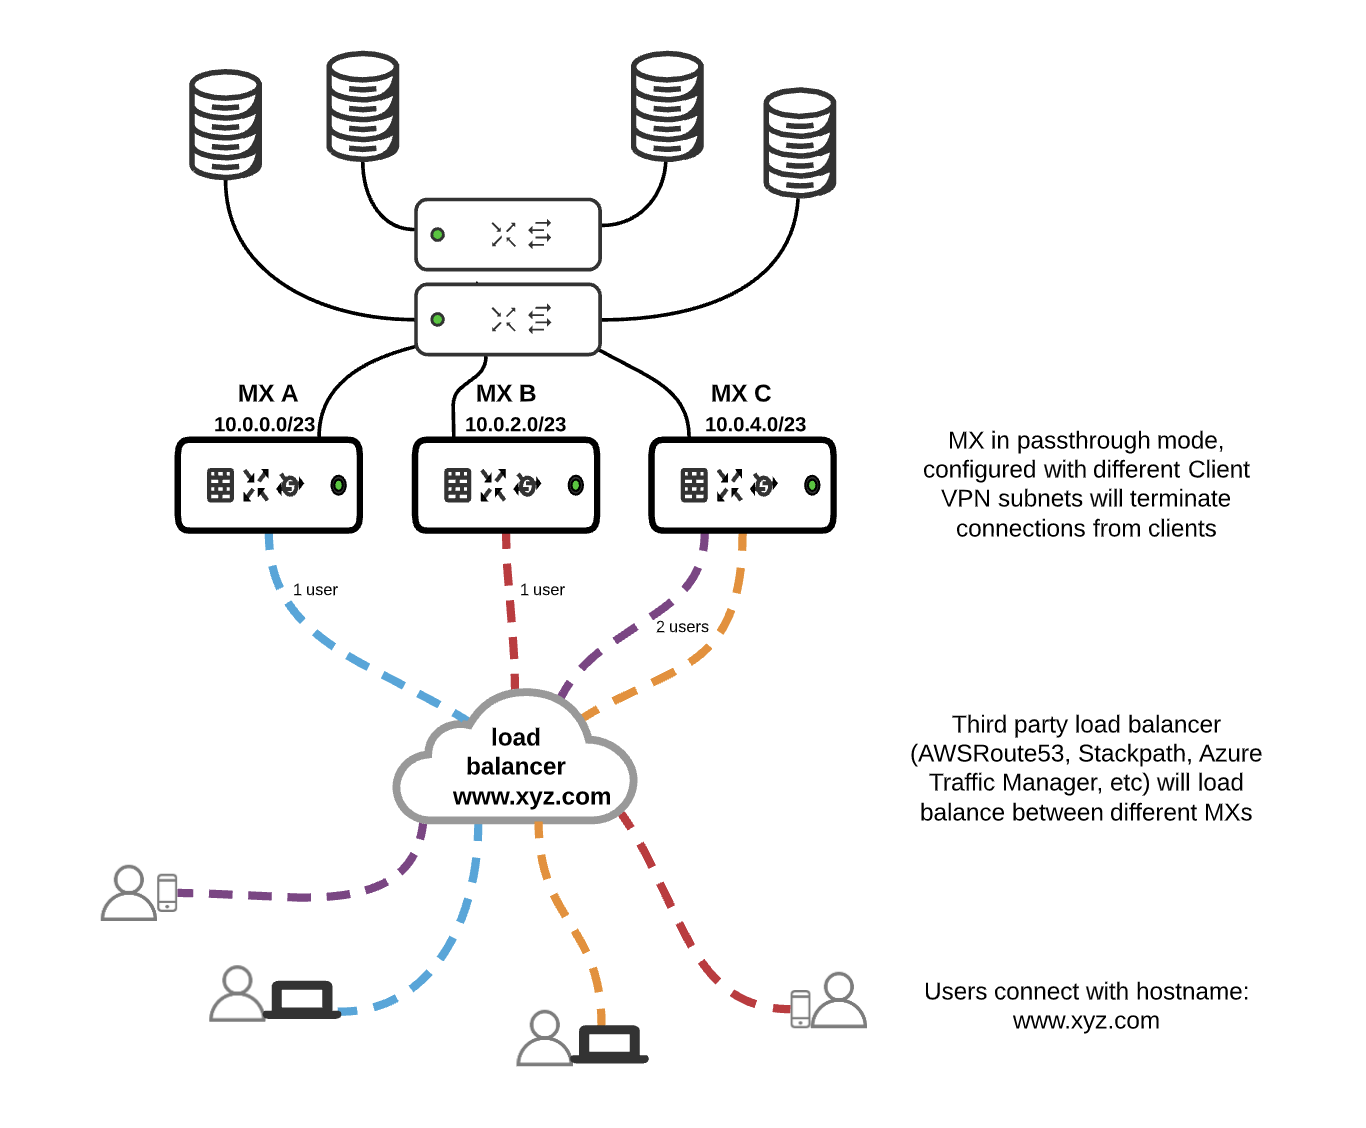 Diagram depicting a third party load balancer used to distribute Client VPN subnets across multiple MX HUBs in passthrough mode.